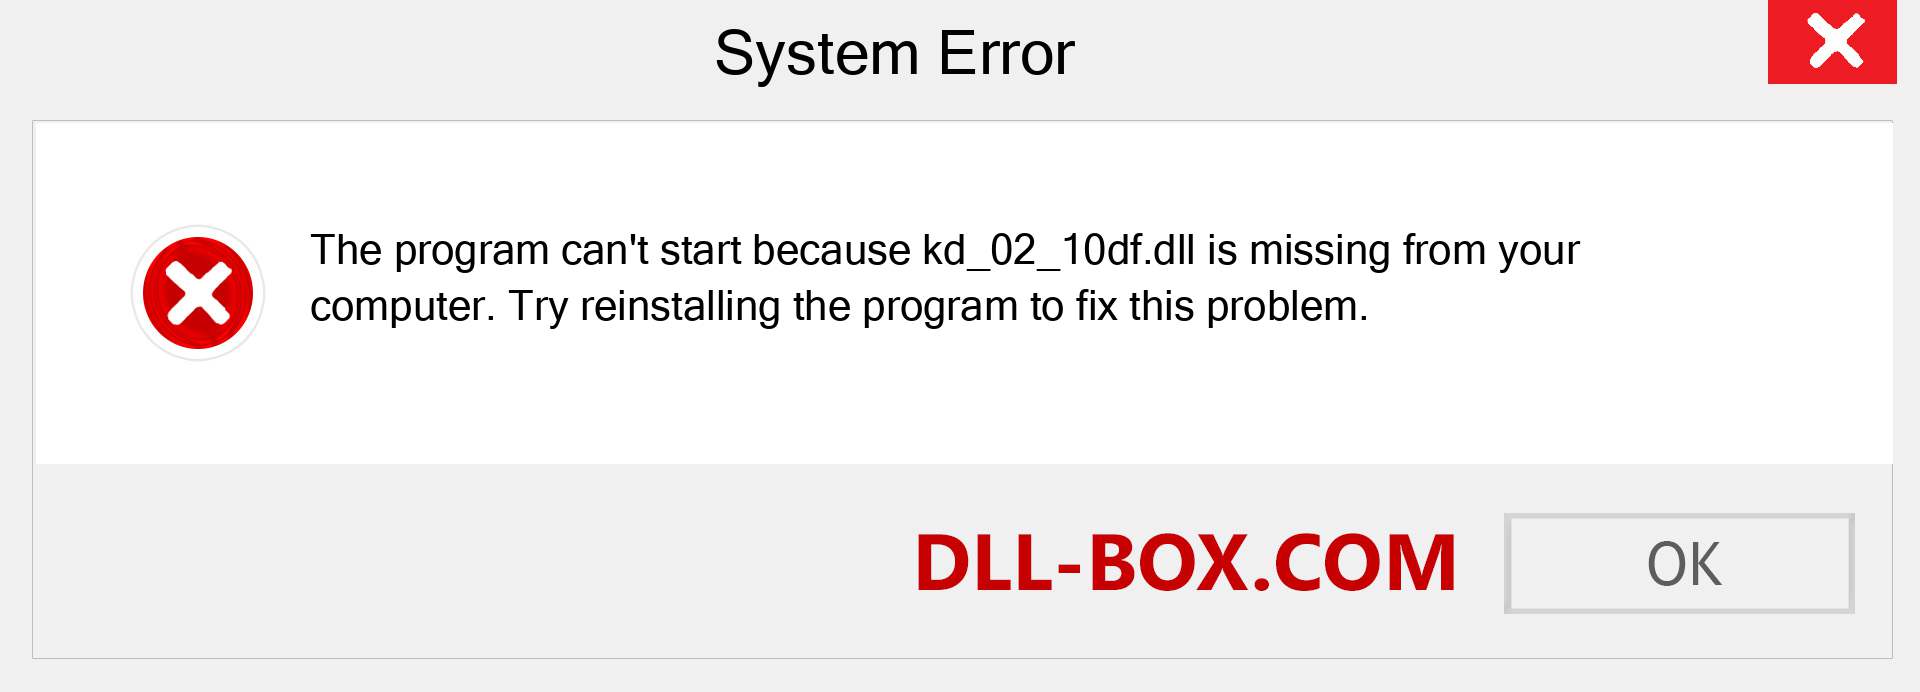  kd_02_10df.dll file is missing?. Download for Windows 7, 8, 10 - Fix  kd_02_10df dll Missing Error on Windows, photos, images